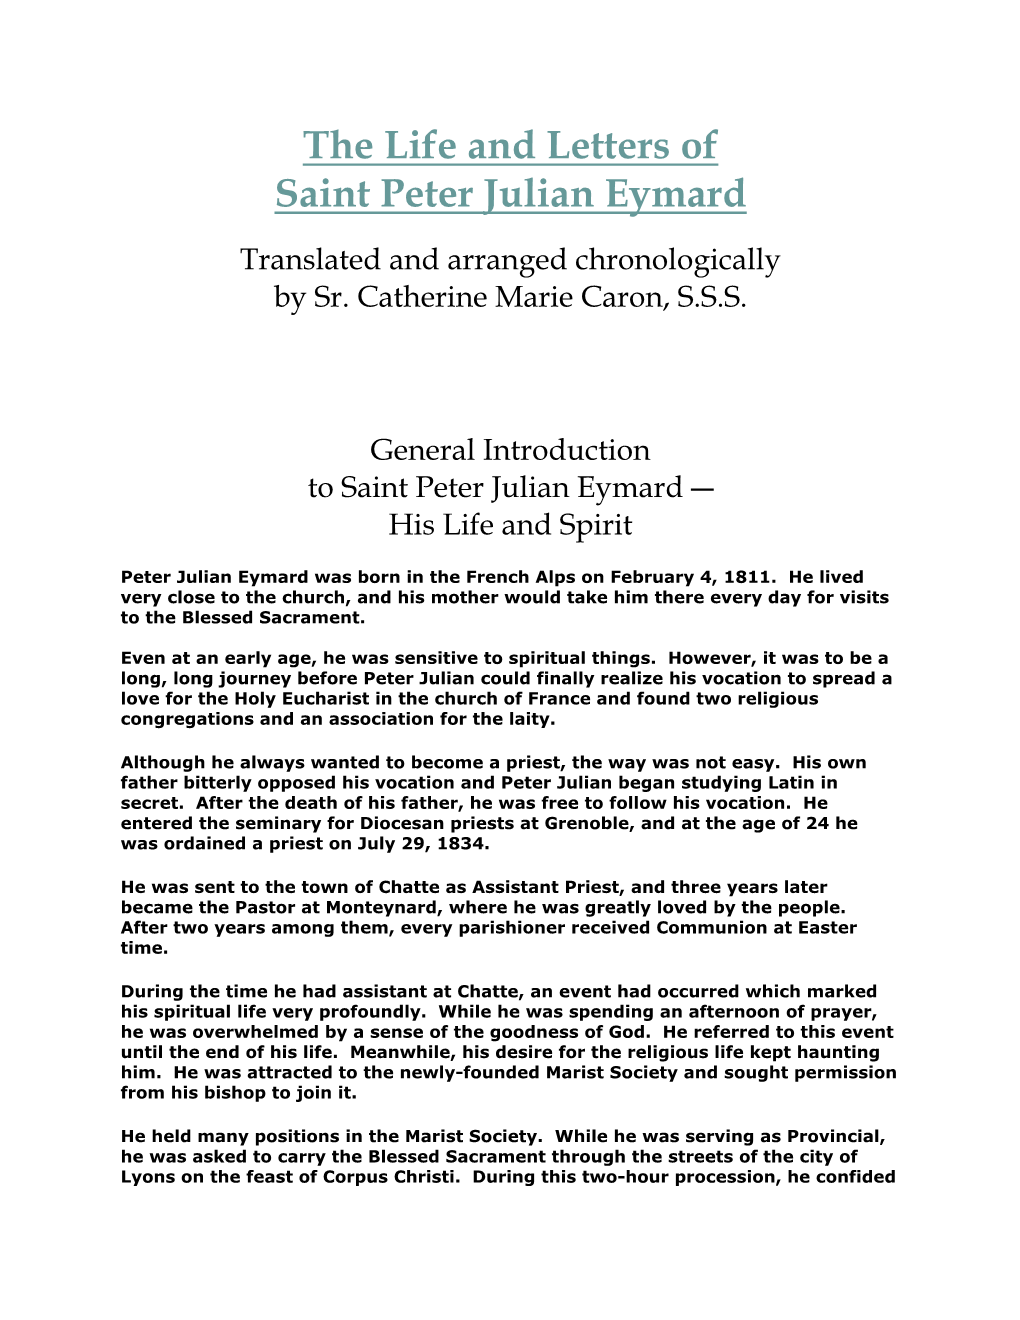 The Life and Letters of Saint Peter Julian Eymard